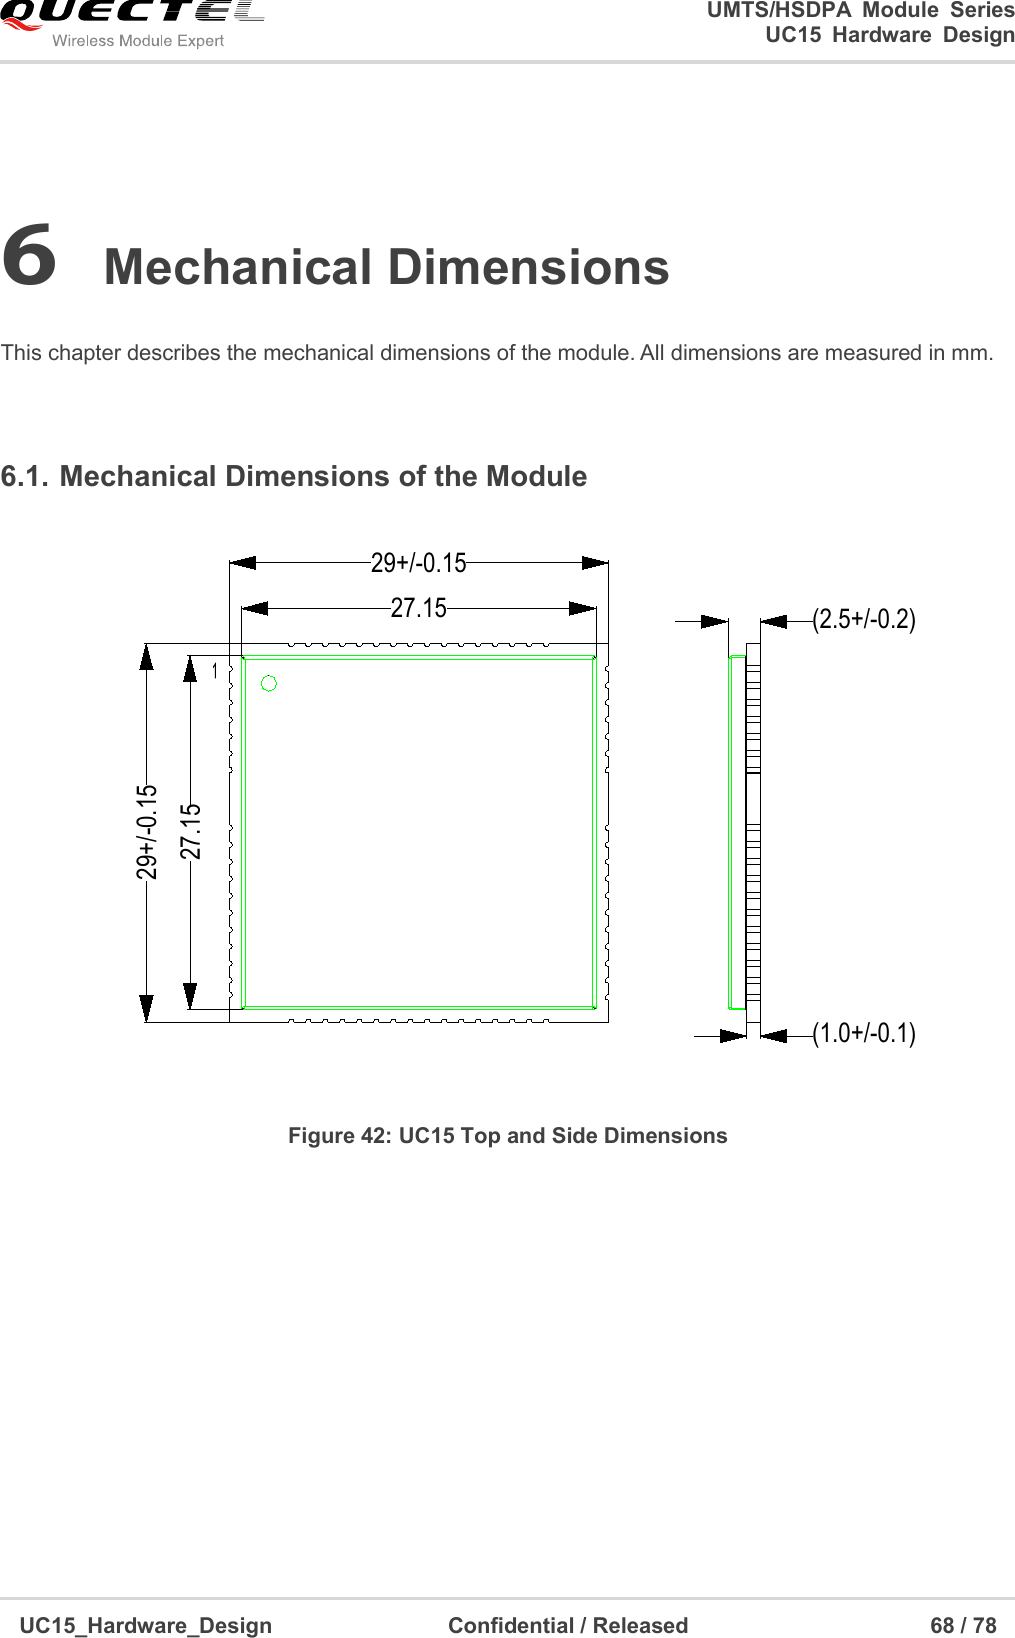                                                                        UMTS/HSDPA  Module  Series                                                                 UC15 Hardware Design  UC15_Hardware_Design                                Confidential / Released                                            68 / 78    6 Mechanical Dimensions  This chapter describes the mechanical dimensions of the module. All dimensions are measured in mm.  6.1. Mechanical Dimensions of the Module (2.5+/-0.2)(1.0+/-0.1)27.1527.1529+/-0.1529+/-0.15 Figure 42: UC15 Top and Side Dimensions         